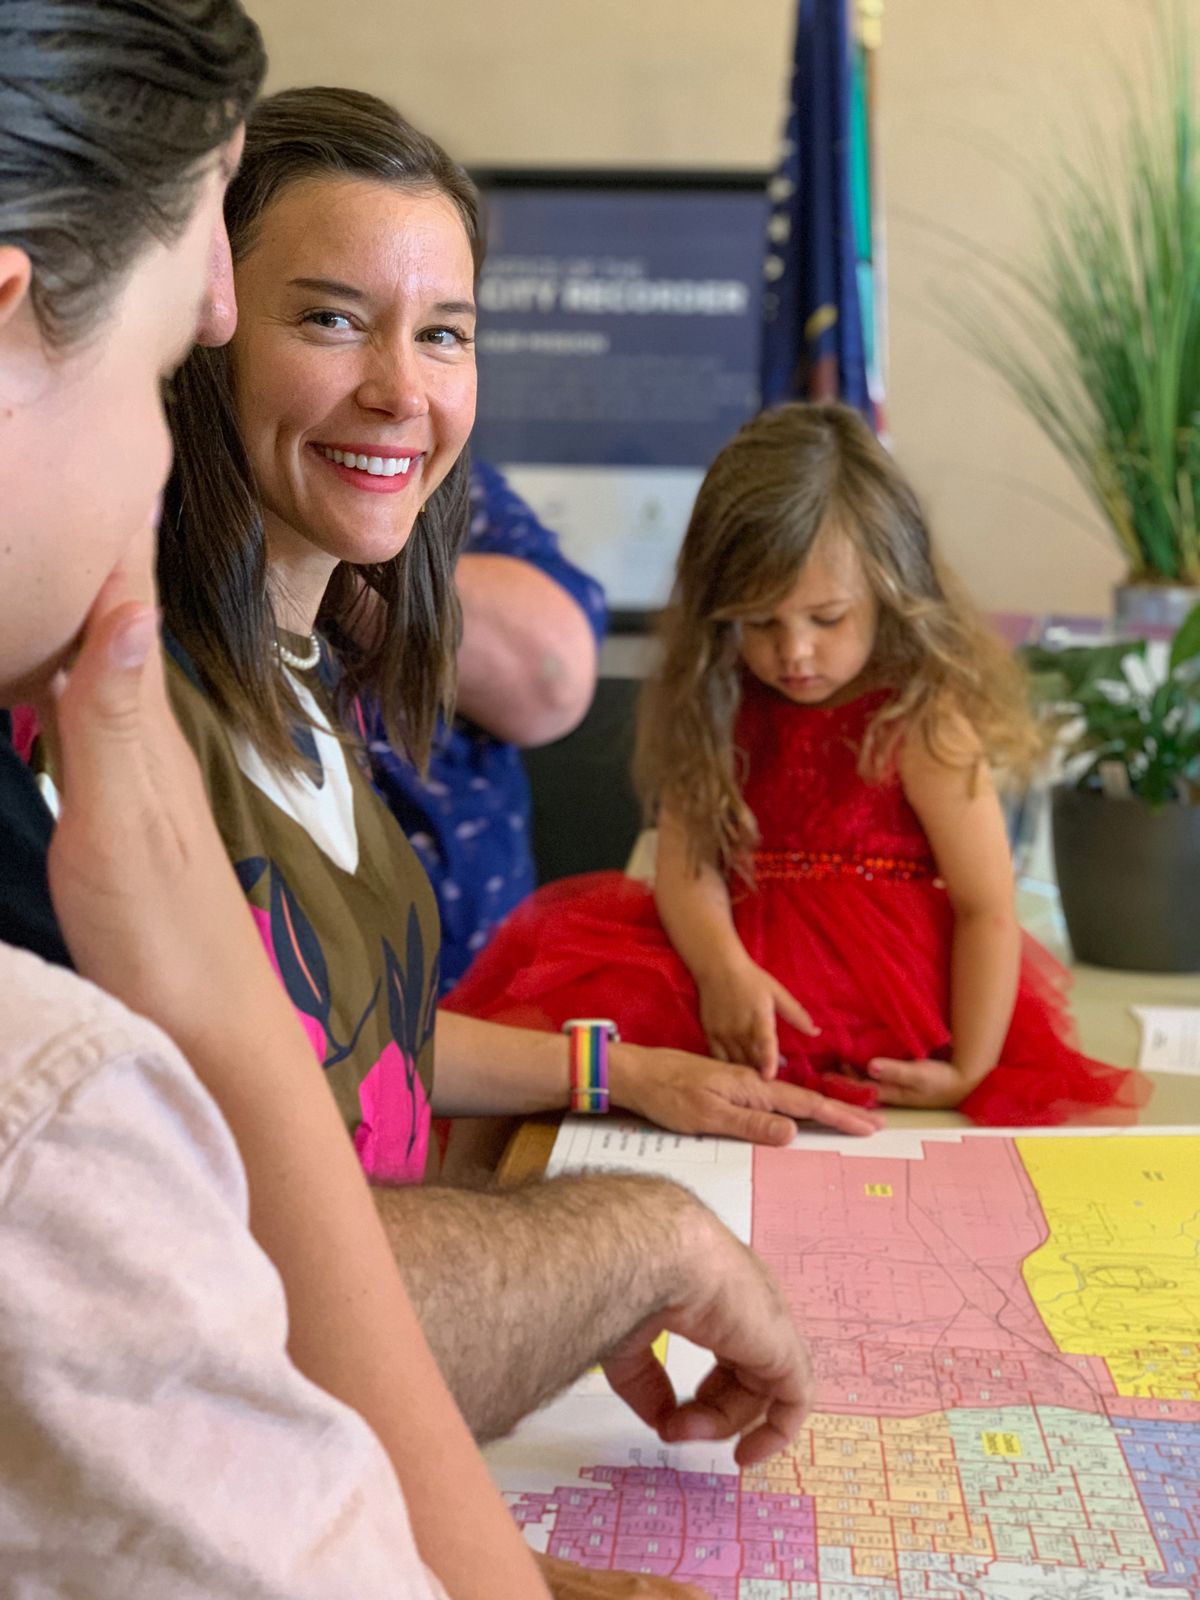 Salt Lake City Councilwoman Erin Mendenhall officially filed as a candidate for the Salt Lake City mayor's race Wednesday, June 5, 2019.